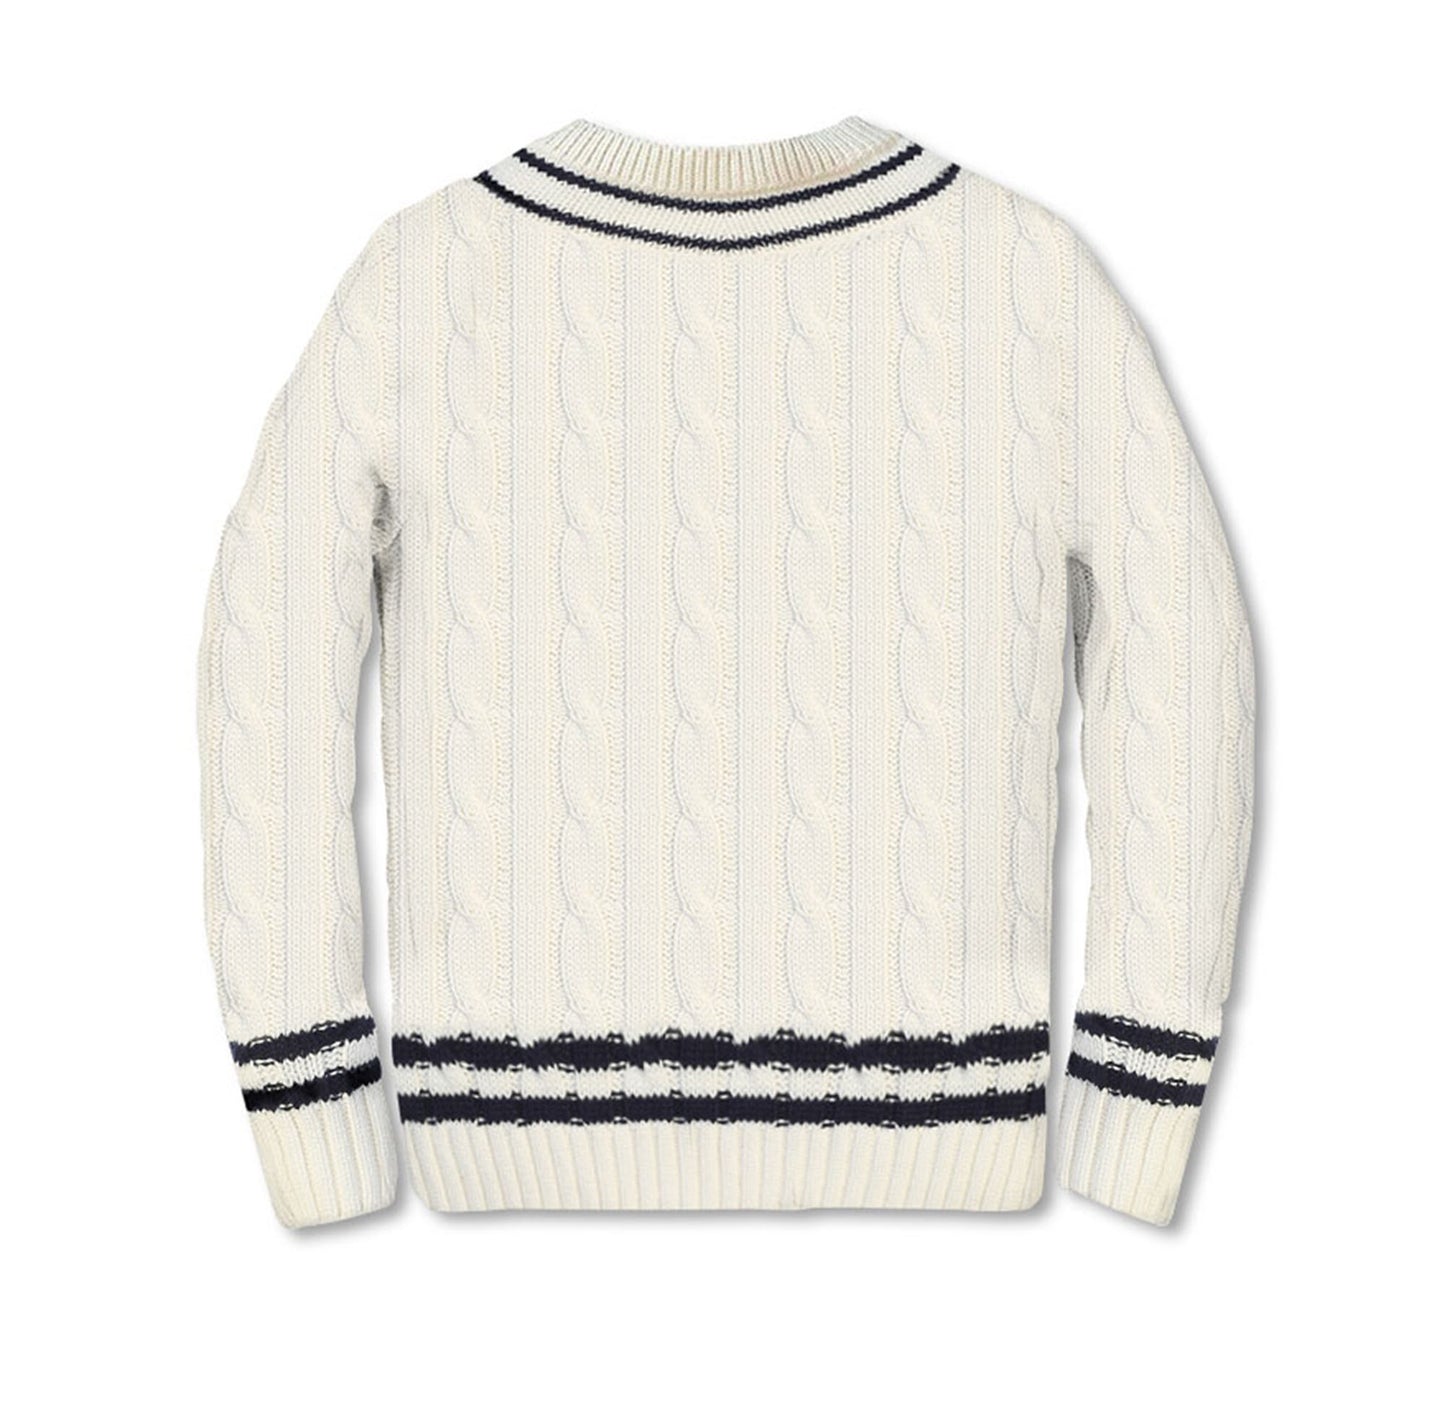 V-Neck Cable Knit Sweater 100% Cotton -White Off